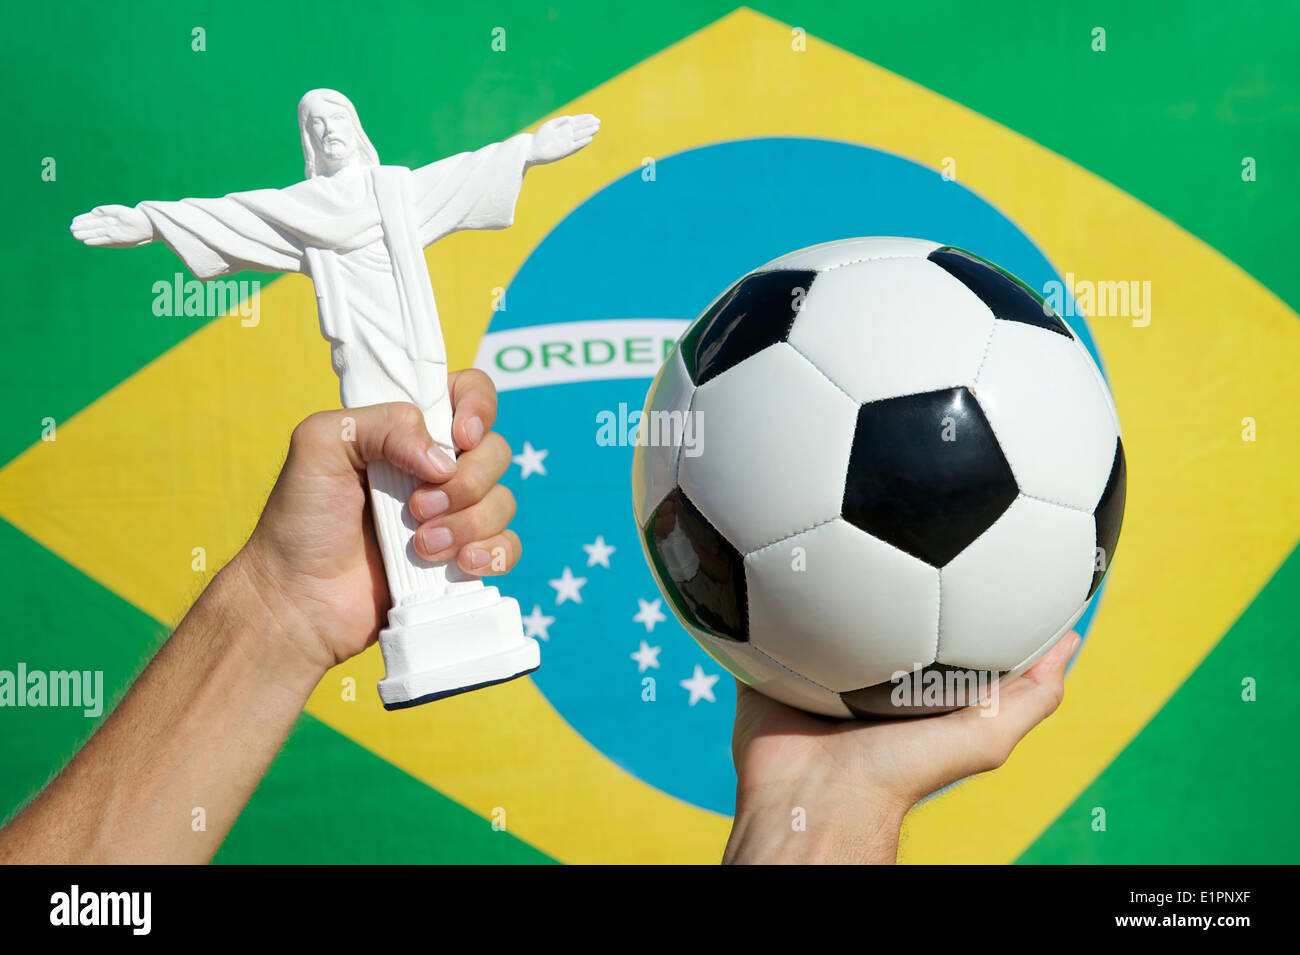 Hands holding football soccer ball and souvenir statue of Corcovado Cristo  Redentor in front of Brazilian flag Stock Photo - Alamy